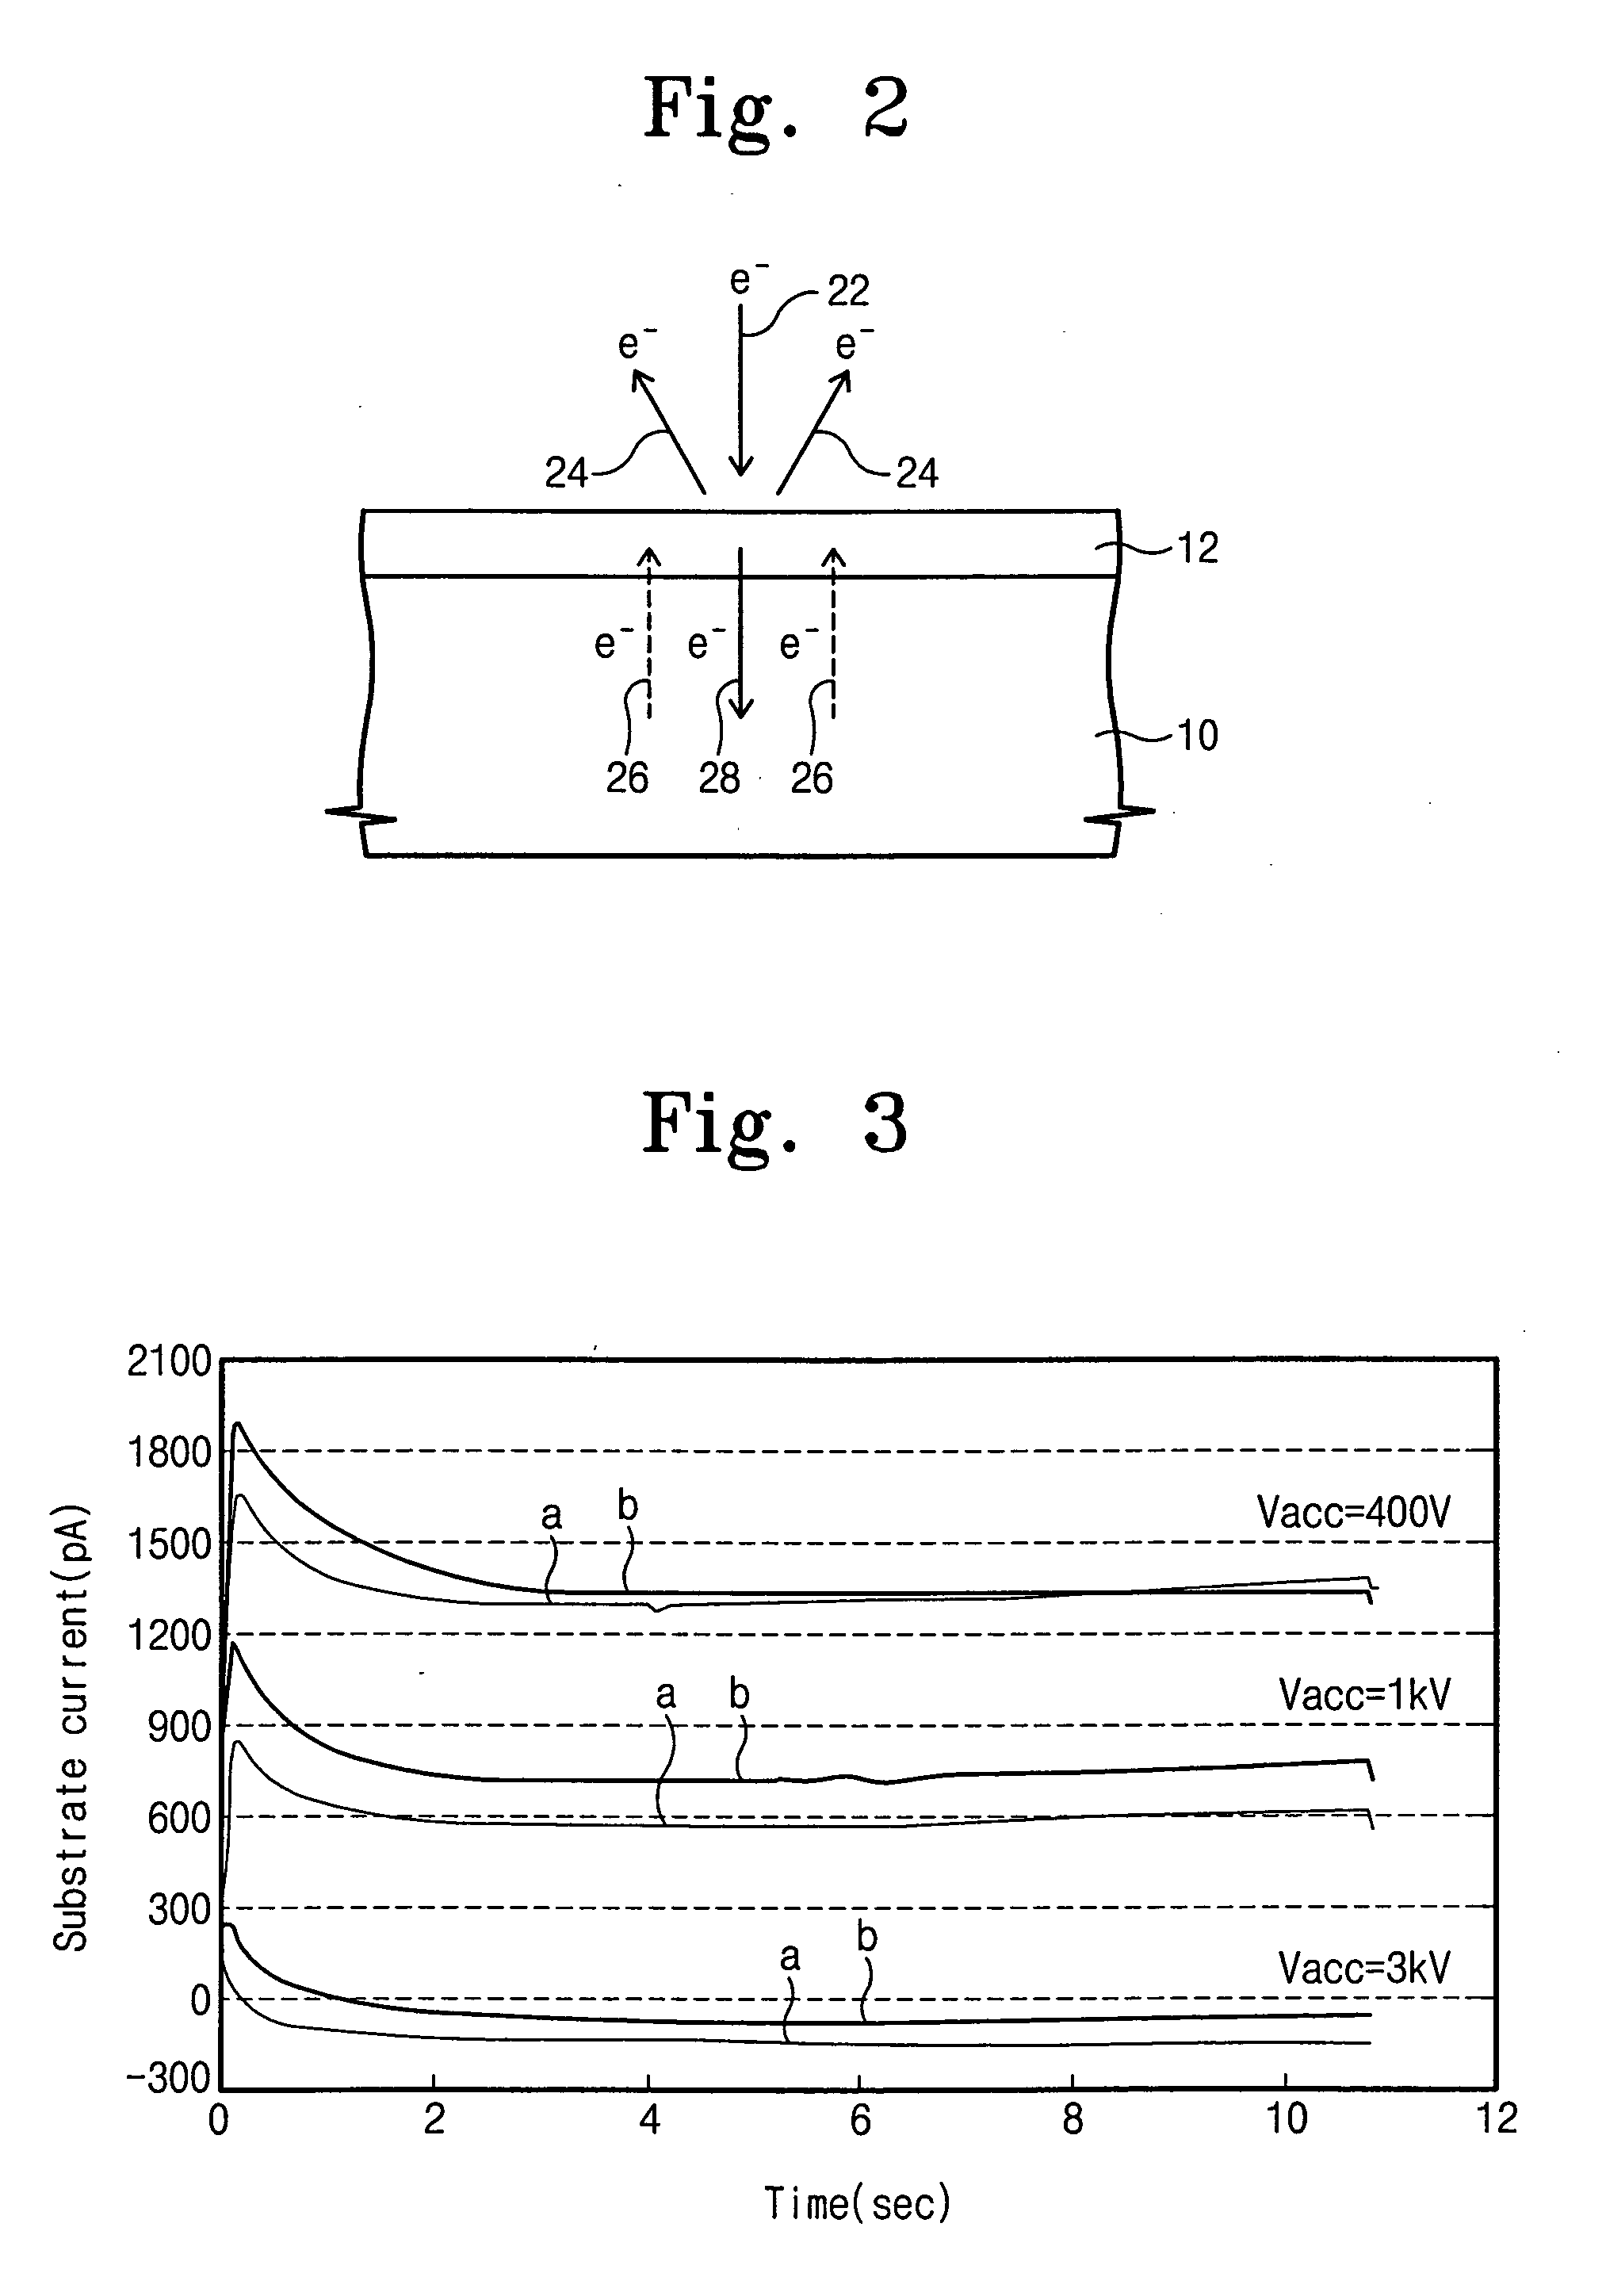 Apparatus and method for measuring substrates